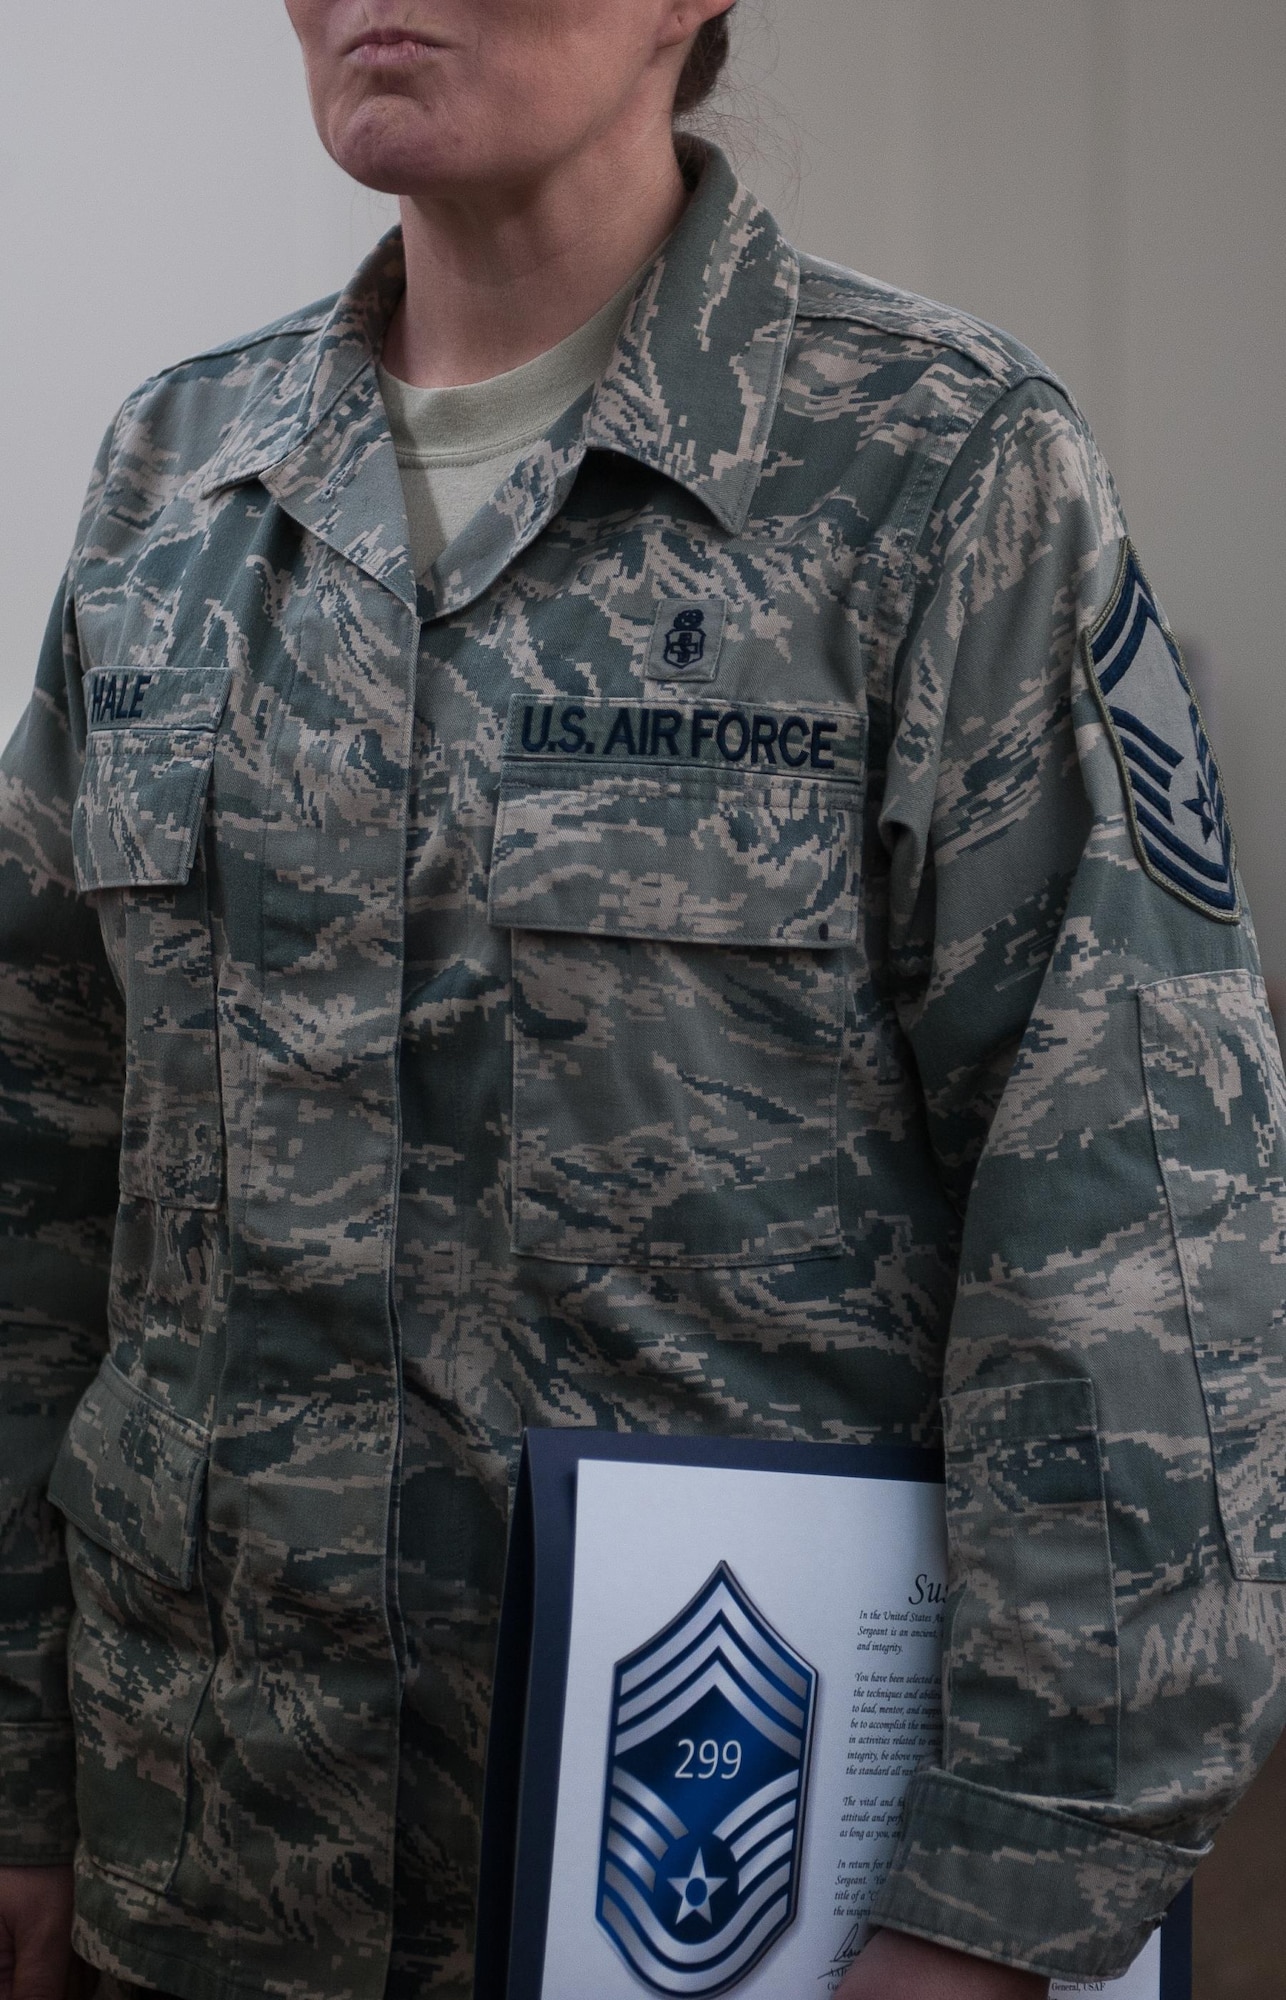 Senior Master Sgt. Susan Hale, 86th Medical Squadron command support section operations superintendent, stands with her notification of her promotion to chief master sergeant at Landstuhl Regional Medical Facility, Germany, Dec. 8, 2016. Leaders across Ramstein Air Base joined the selectees to not only congratulate, but also to educate them on the tasks and responsibilities ahead. (U.S. Air Force photo by Airman 1st Class Lane T. Plummer)